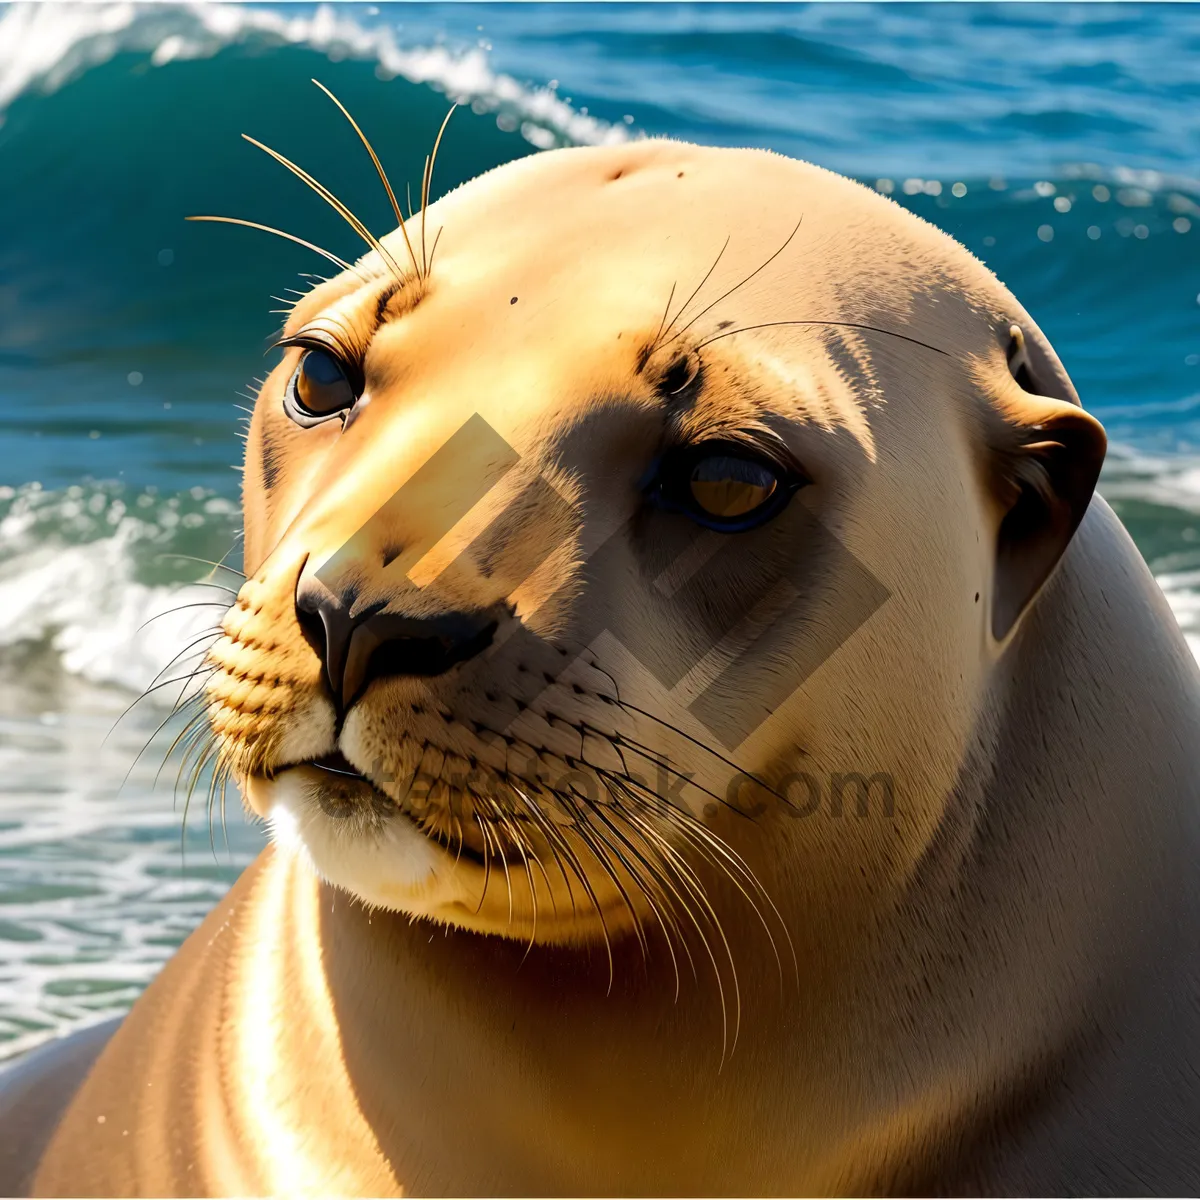 Picture of Graceful Sea Lion Basking in Ocean